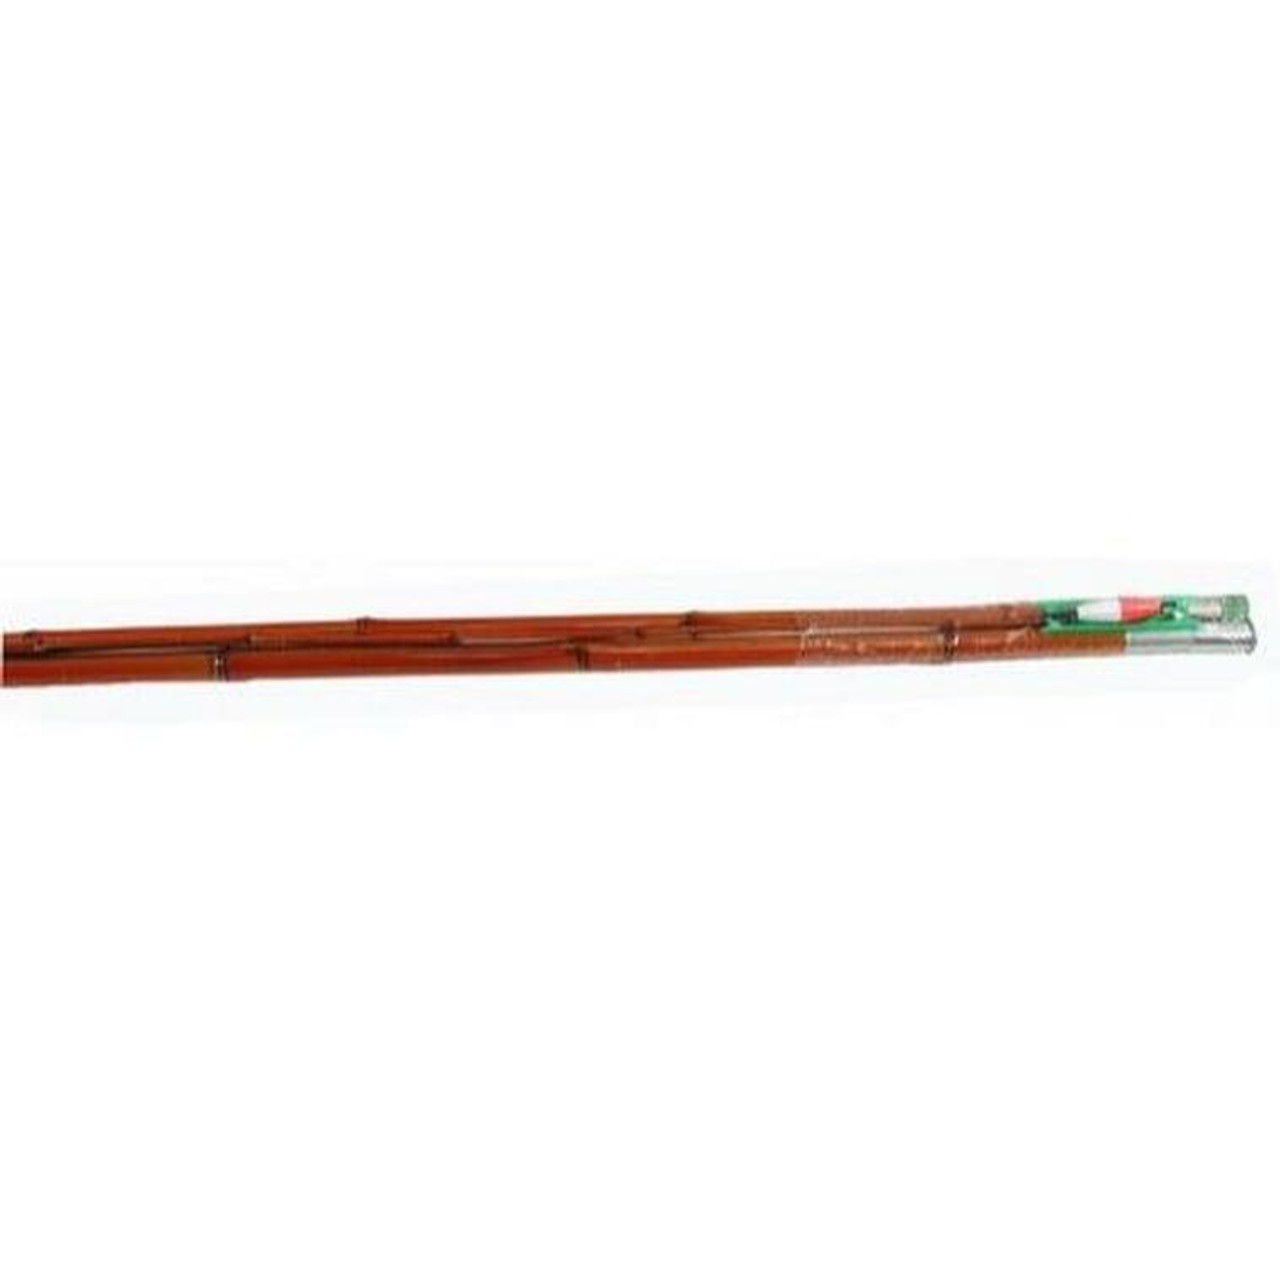 BnM Jointed Bamboo Cane Poles - Presleys Outdoors